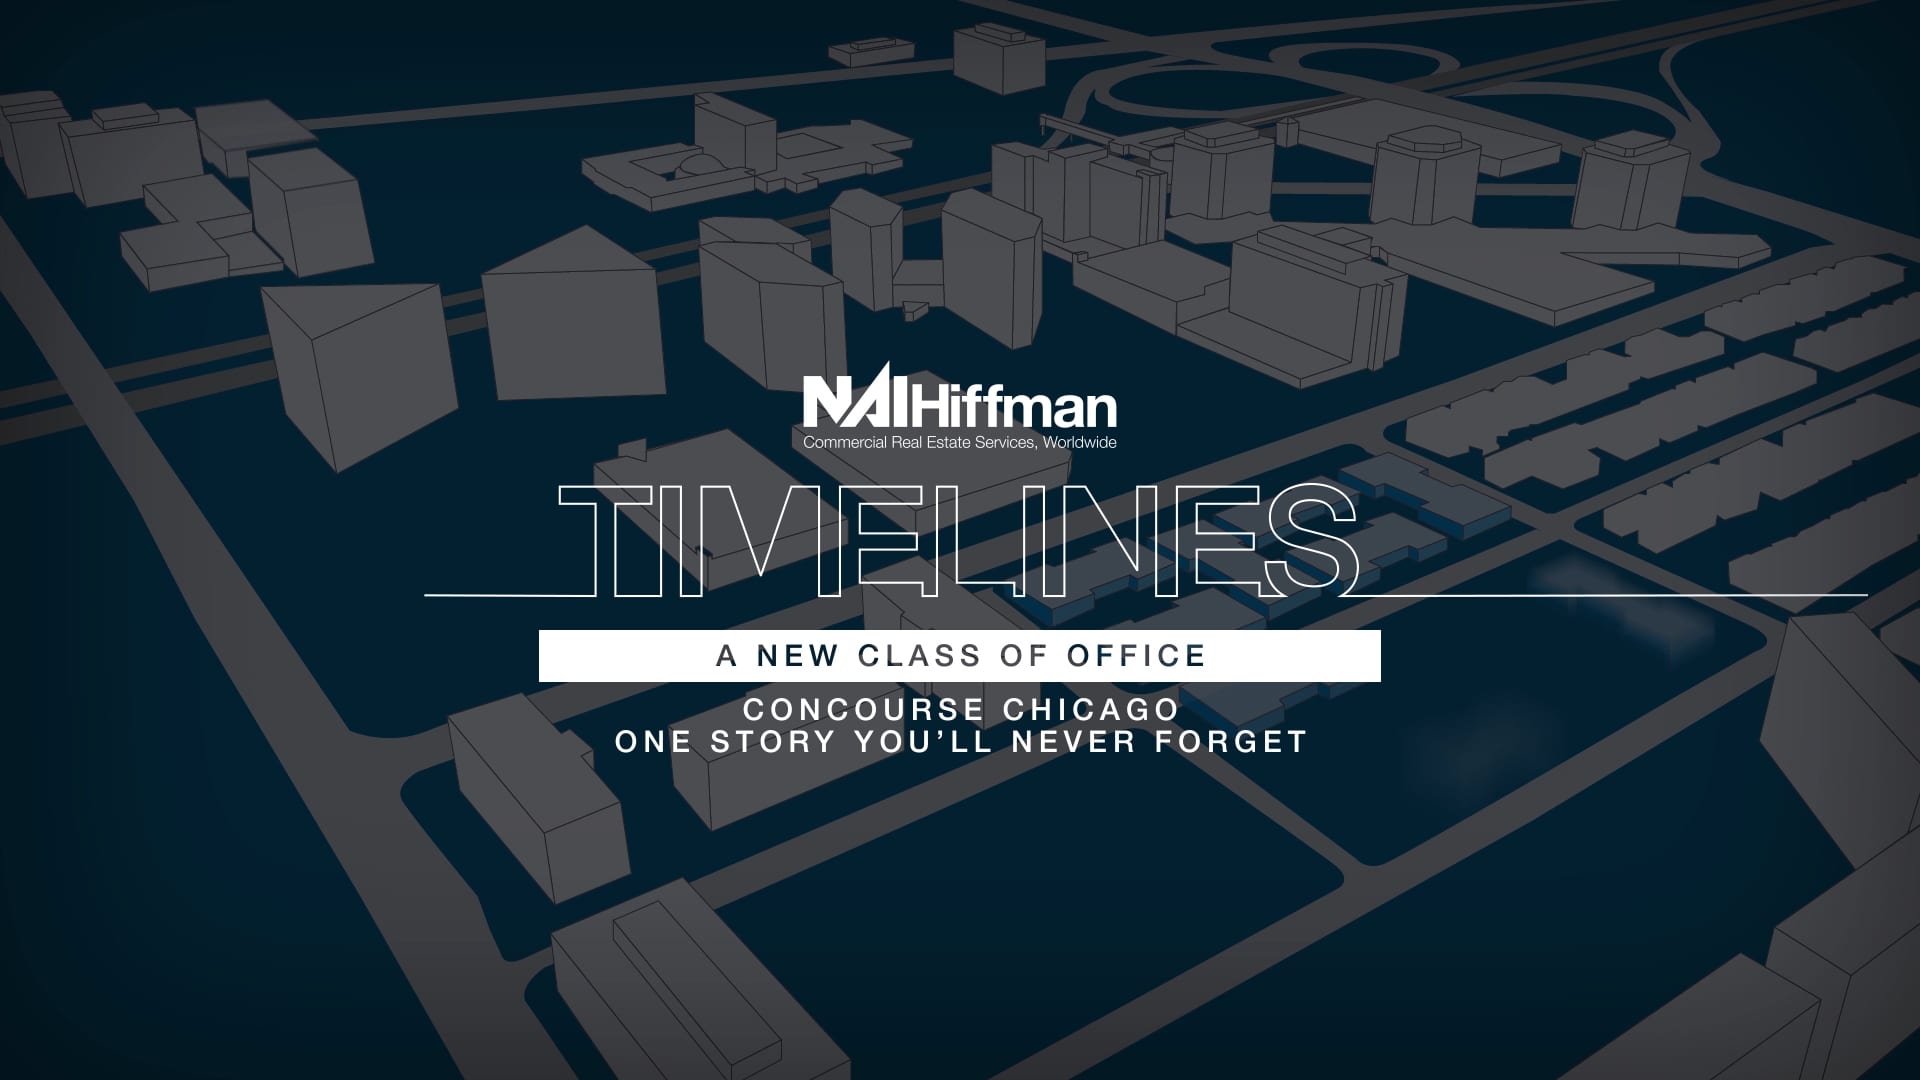 NAI Hiffman Timelines: Renovation and Reintroduction Leads to Leasing